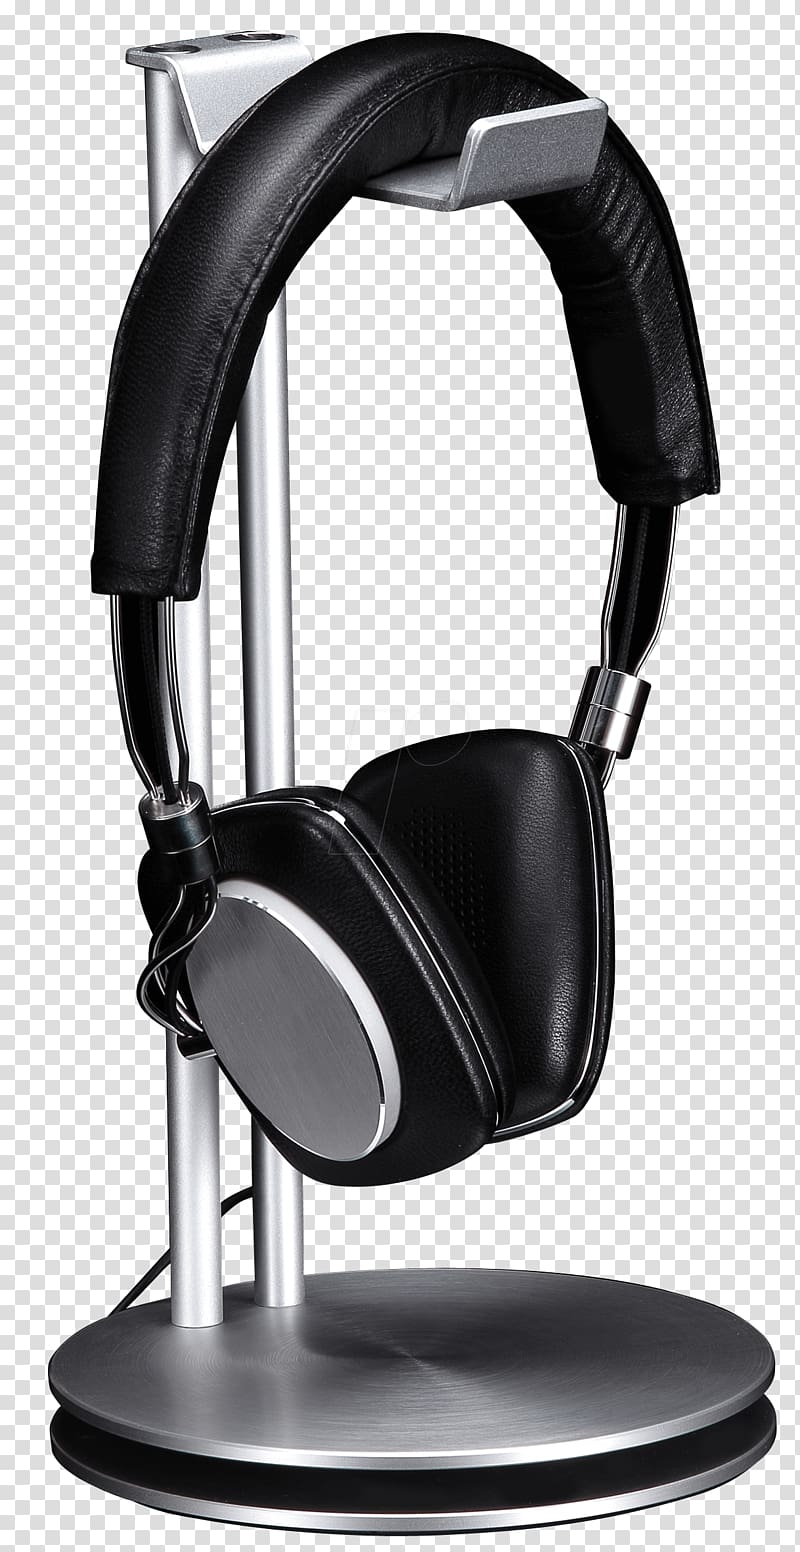 Headphones Just Mobile HeadStand Avant A4tech HS-100 Stereo Gaming Headset Office Headphone with Aux Mic Split Aluminium Amazon.com, headphone cable transparent background PNG clipart